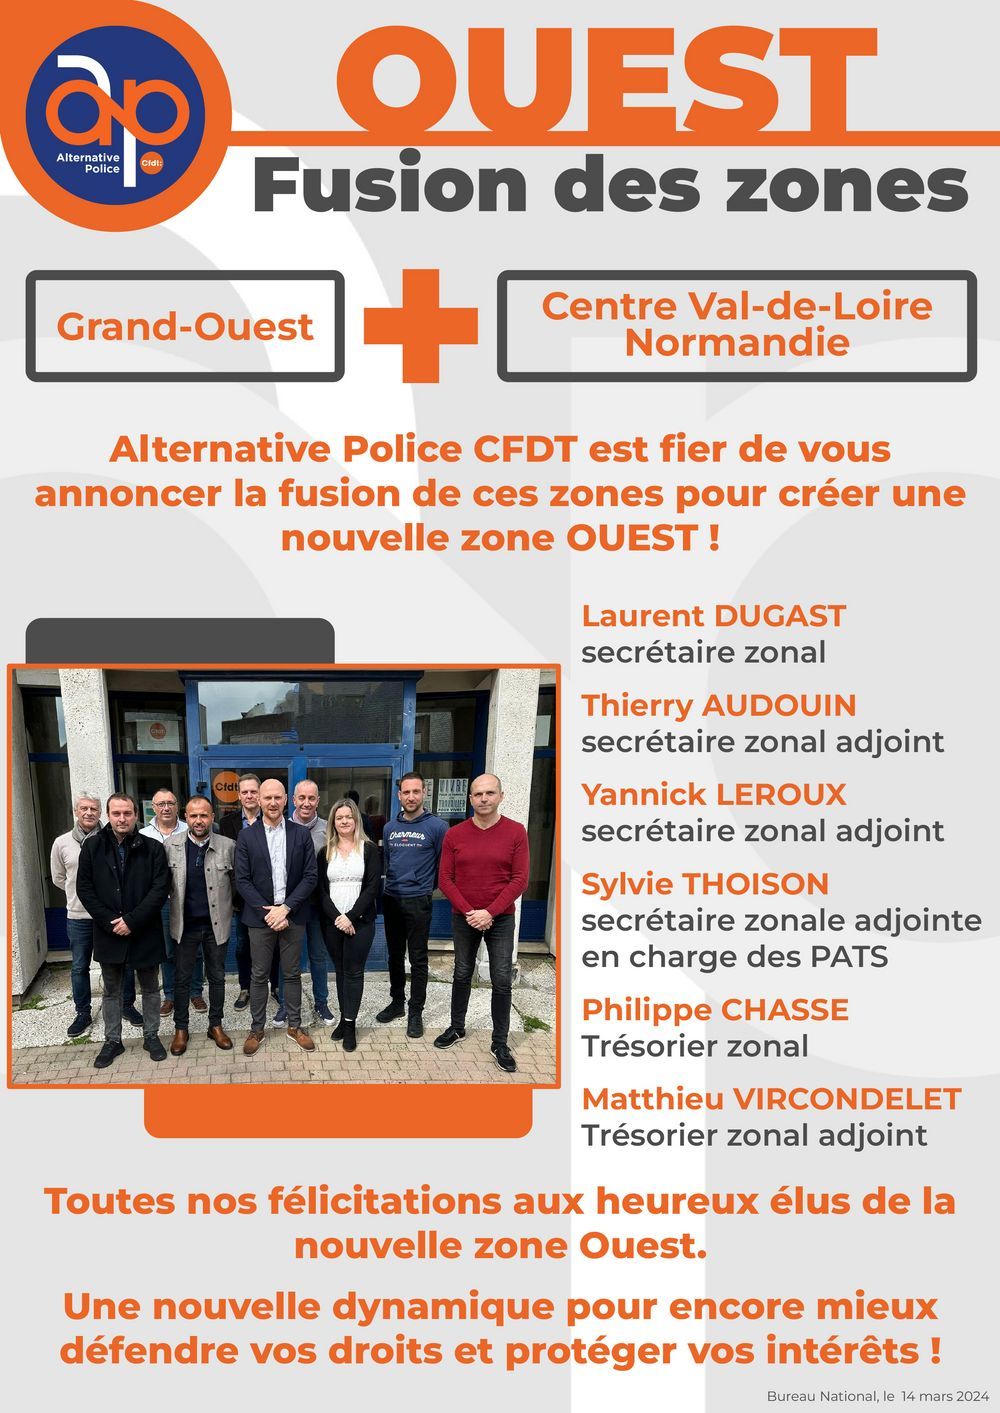 Nouvelle zone OUEST Alternative Police CFDT !